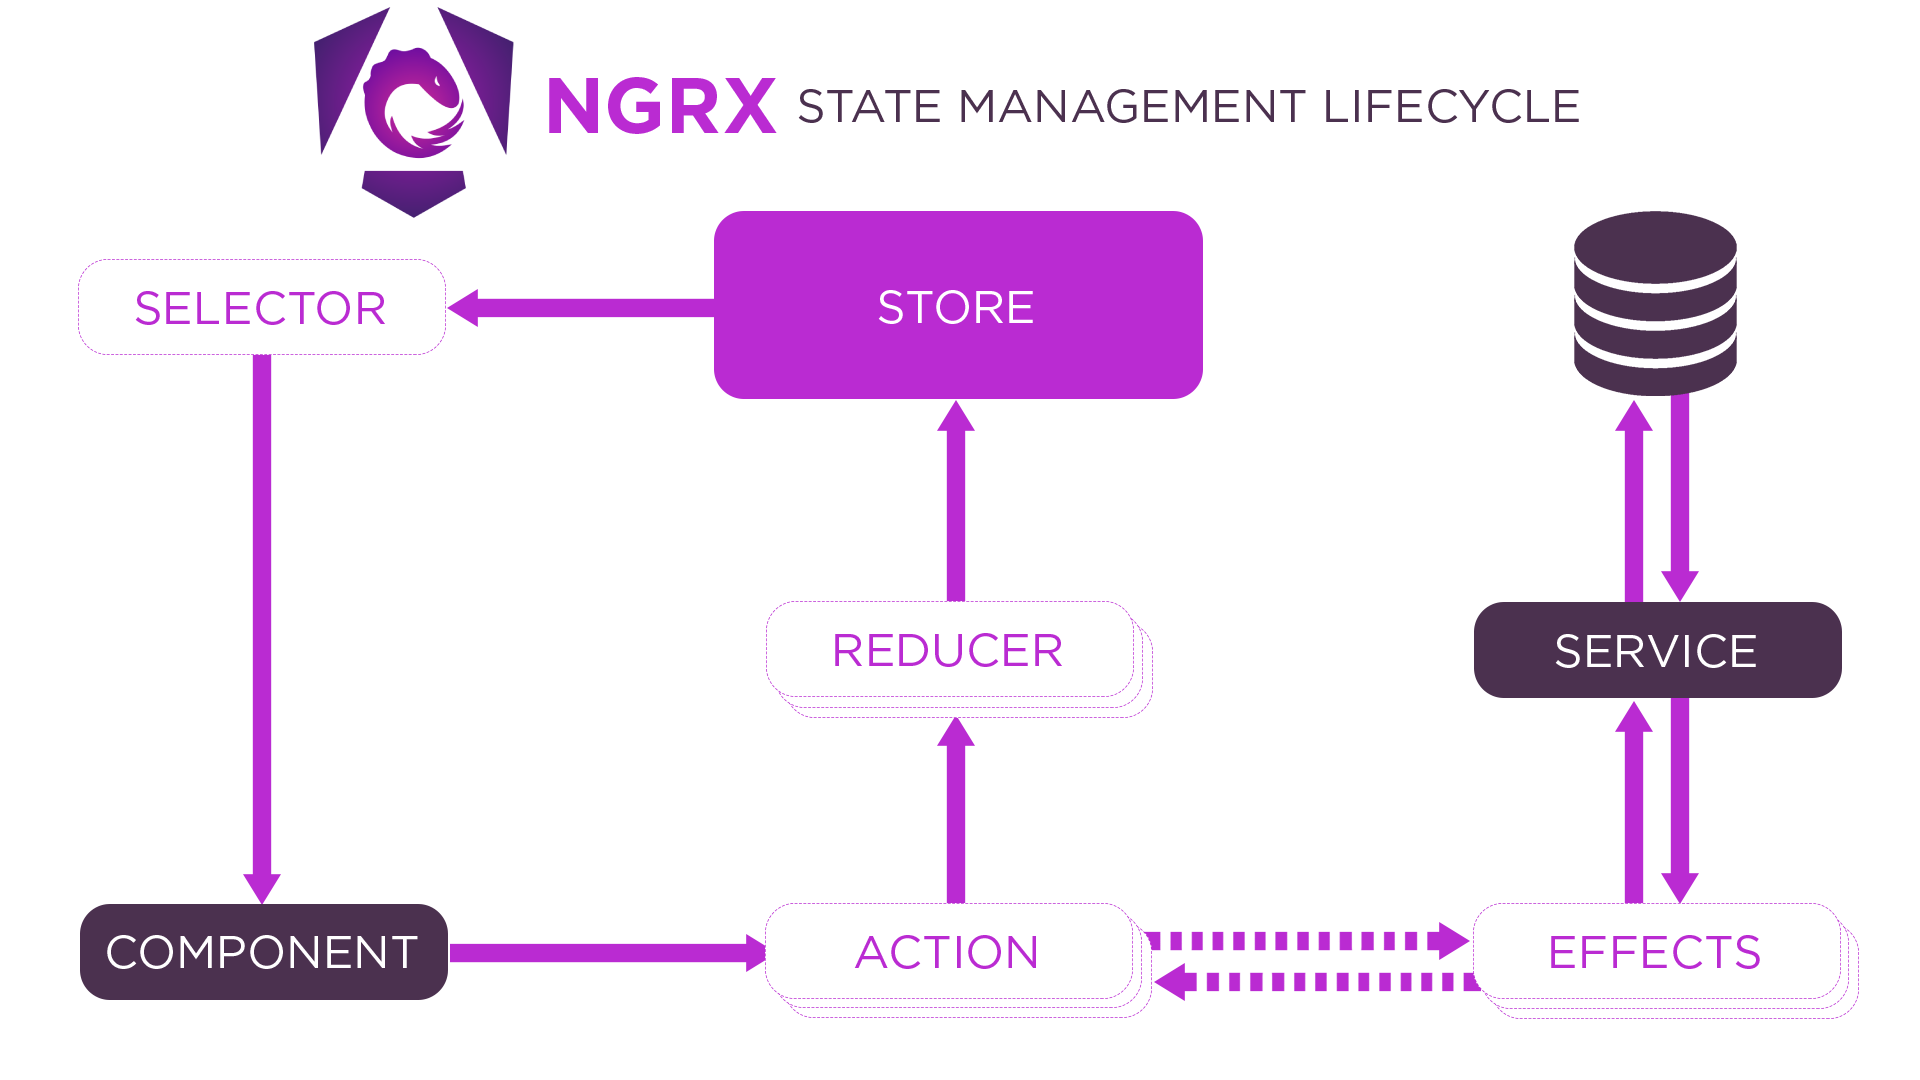 NgRx State Management Lifecycle Diagram